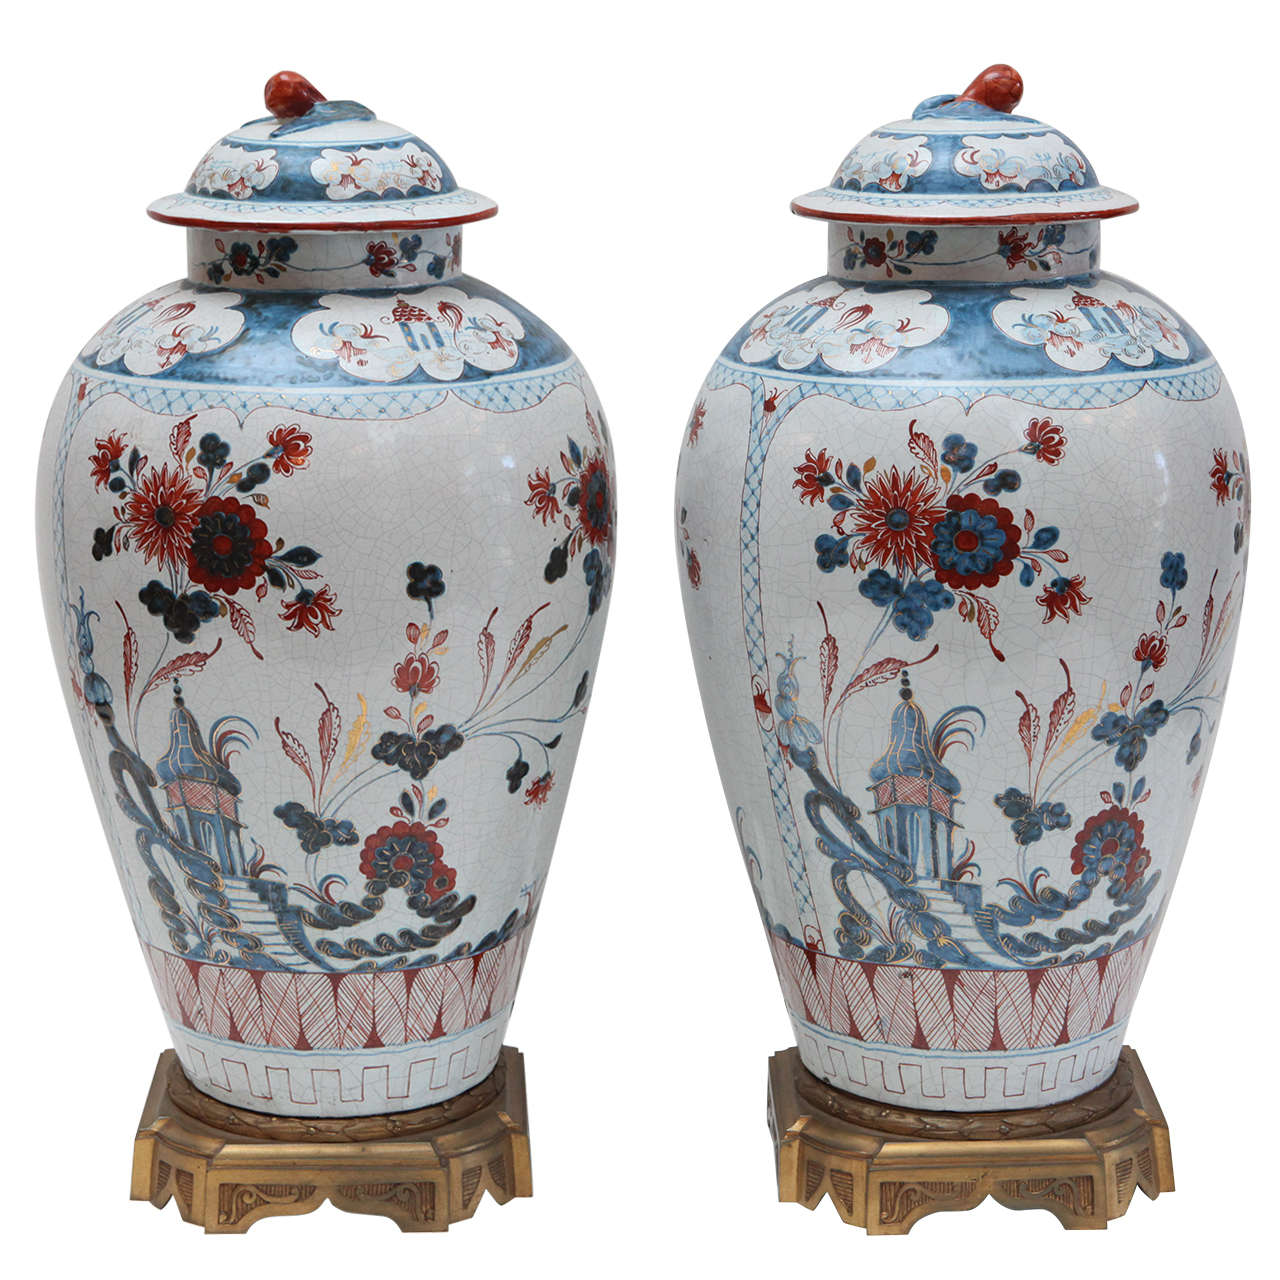 Pair of Hand-Painted, Delft Urns